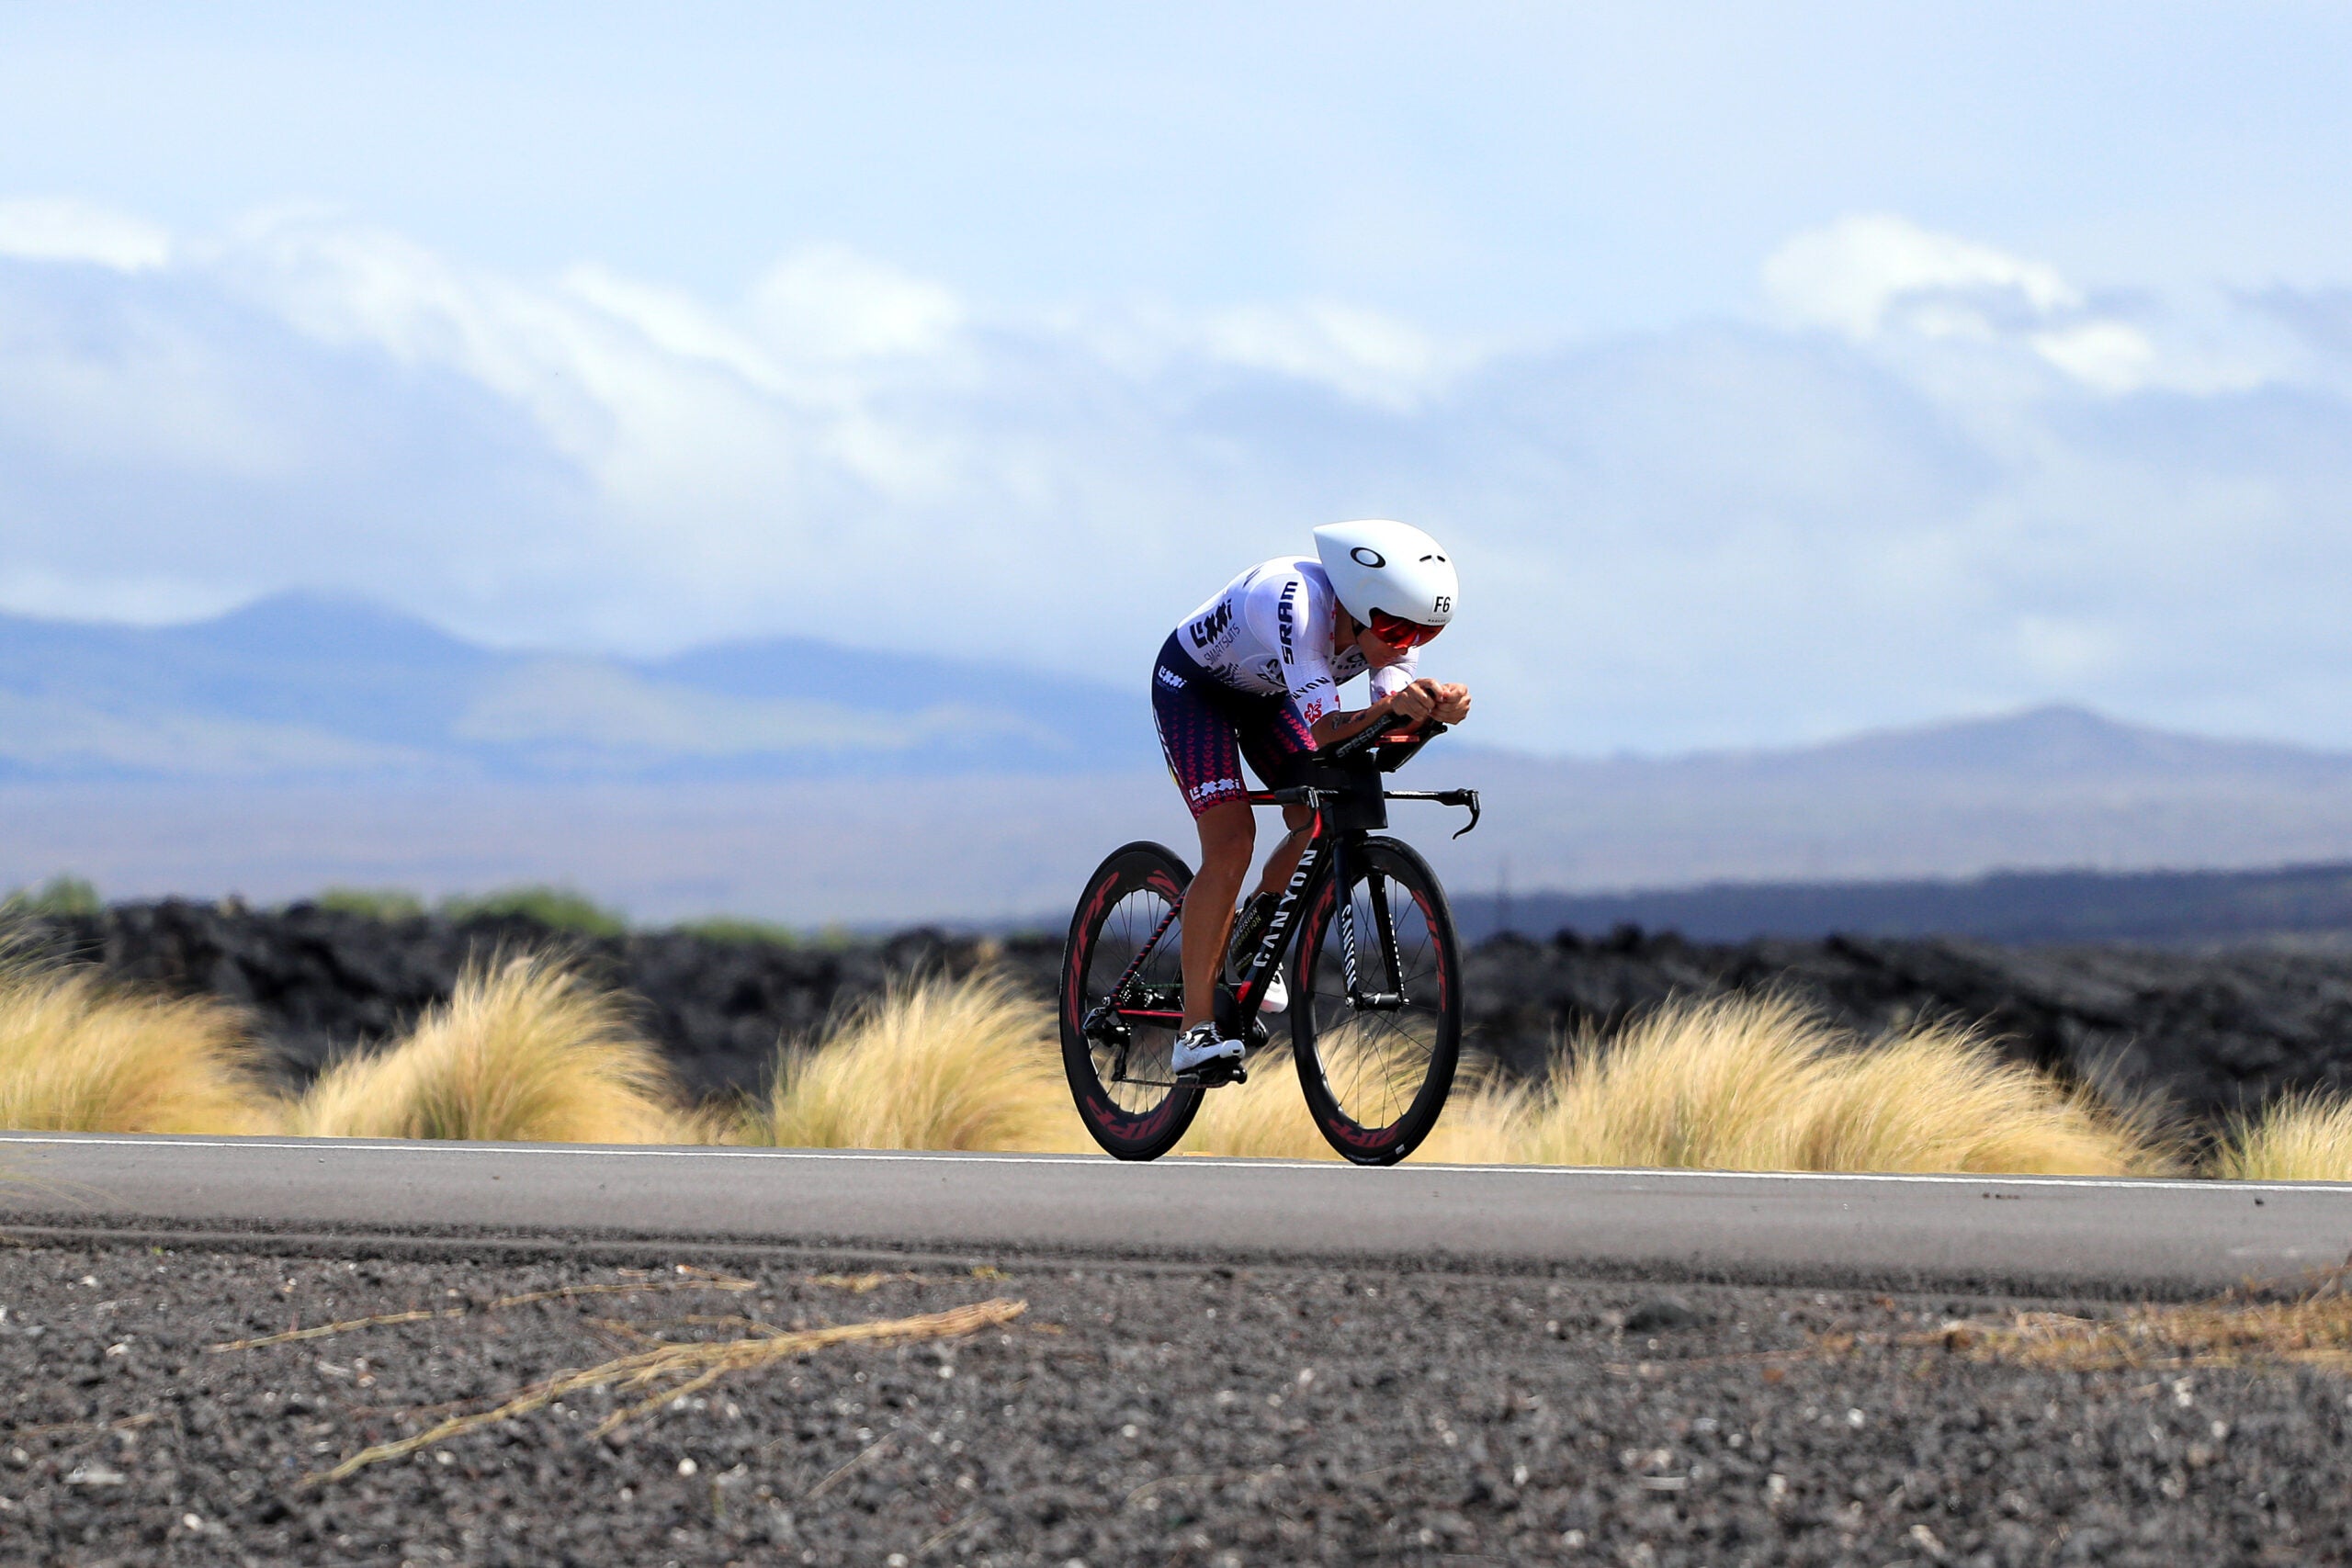 The Ironman World Championship women's pro race bike prediction includes Lucy Charles-Barclay